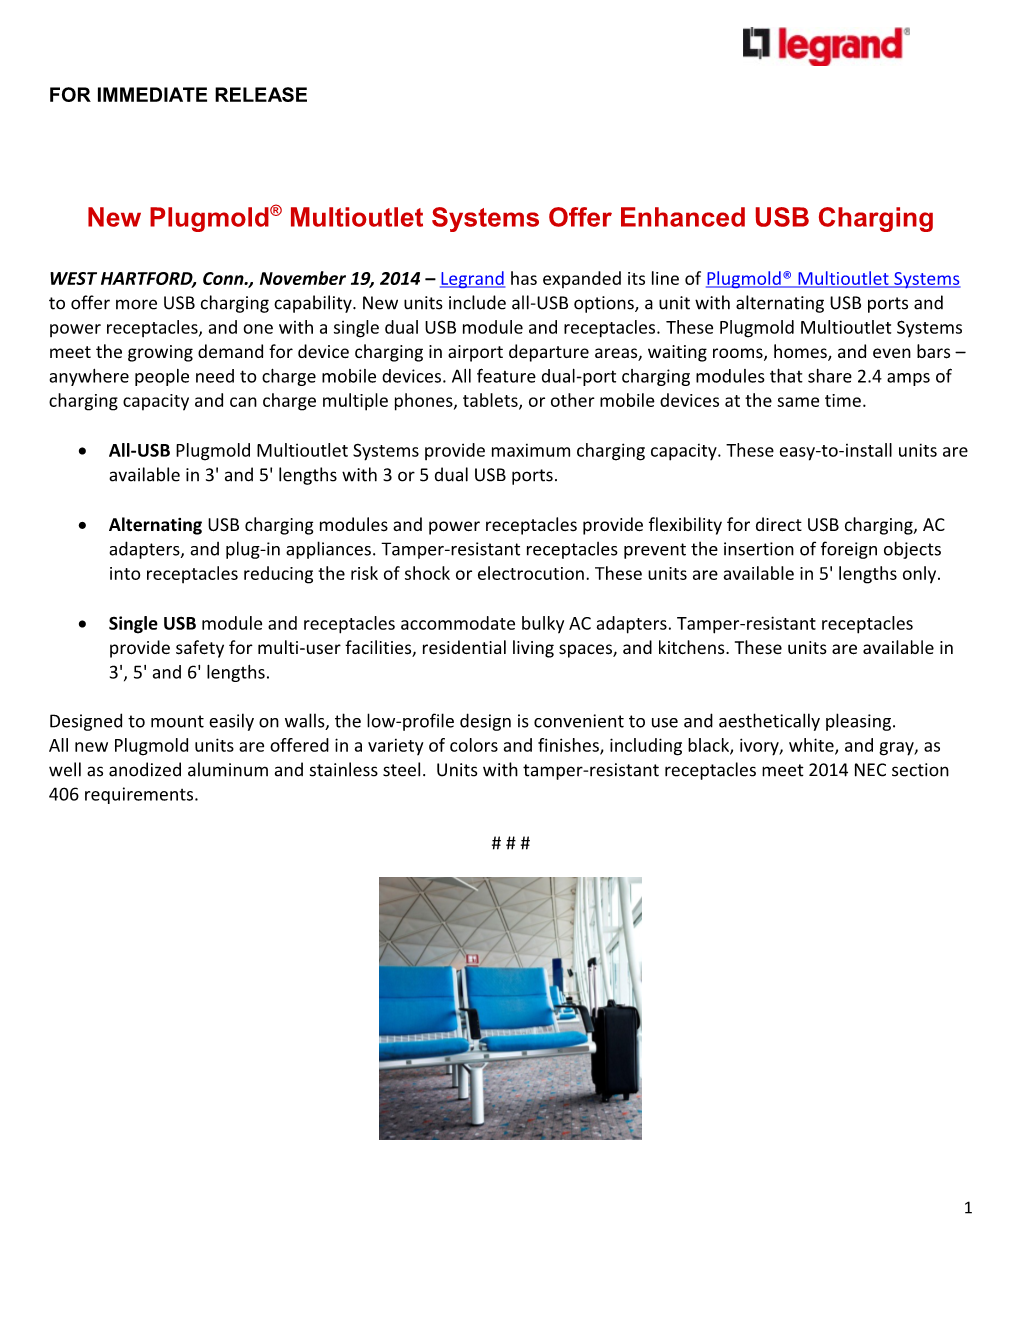 New Plugmold Multioutlet Systems Offer Enhanced USB Charging